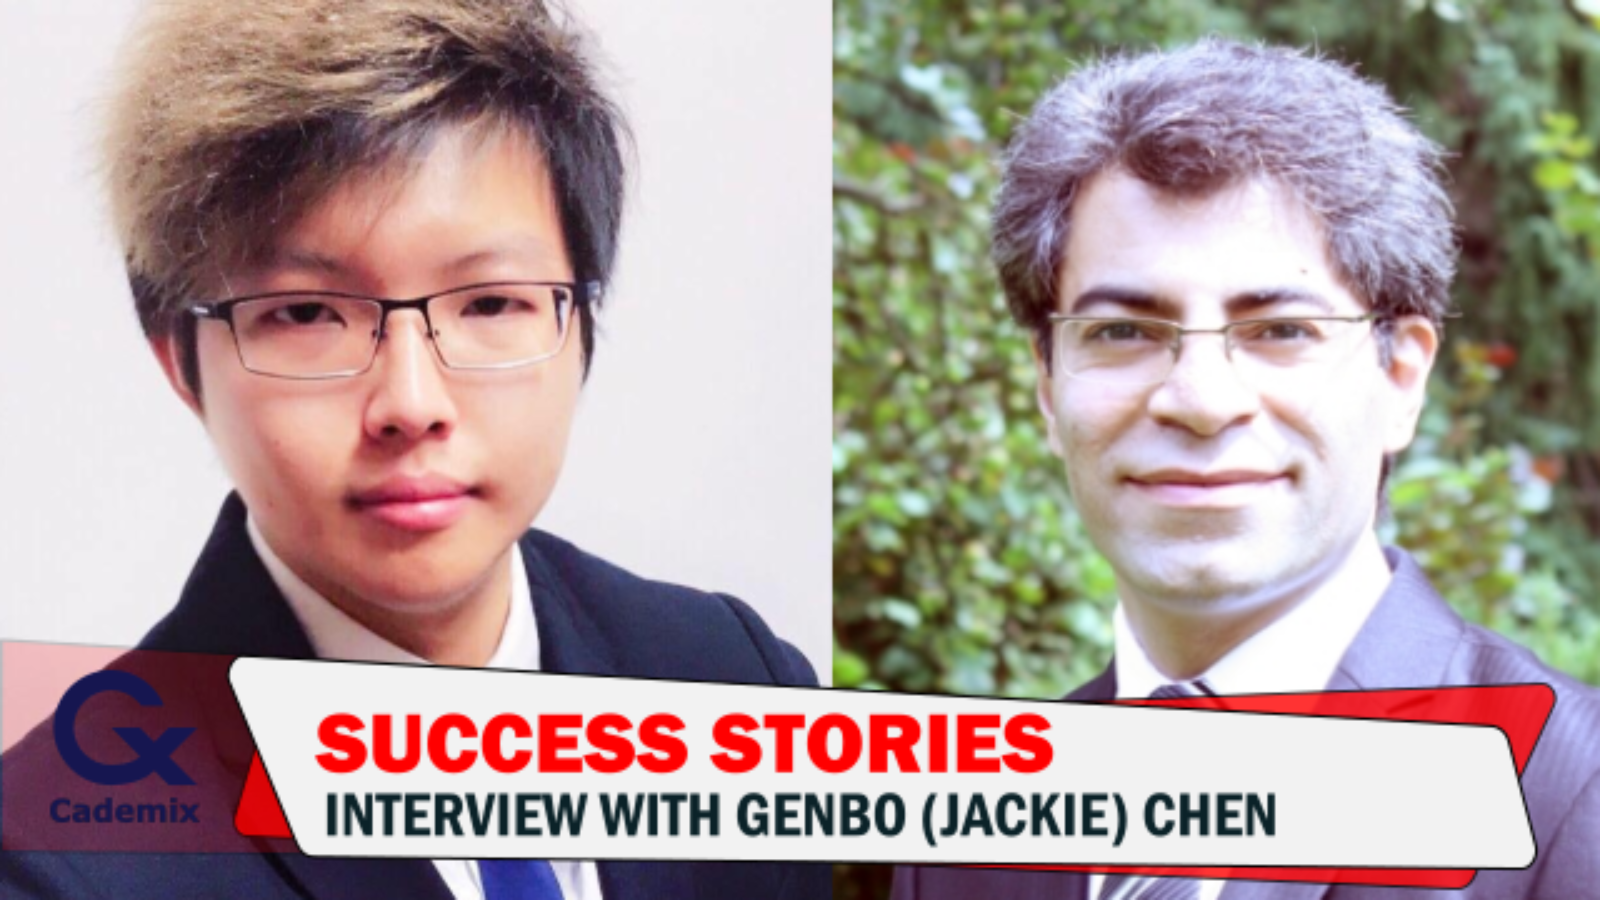 Javad Zarbakhsh Interview with Jackie Genbo Chen Cademix Success Story, Study Austria